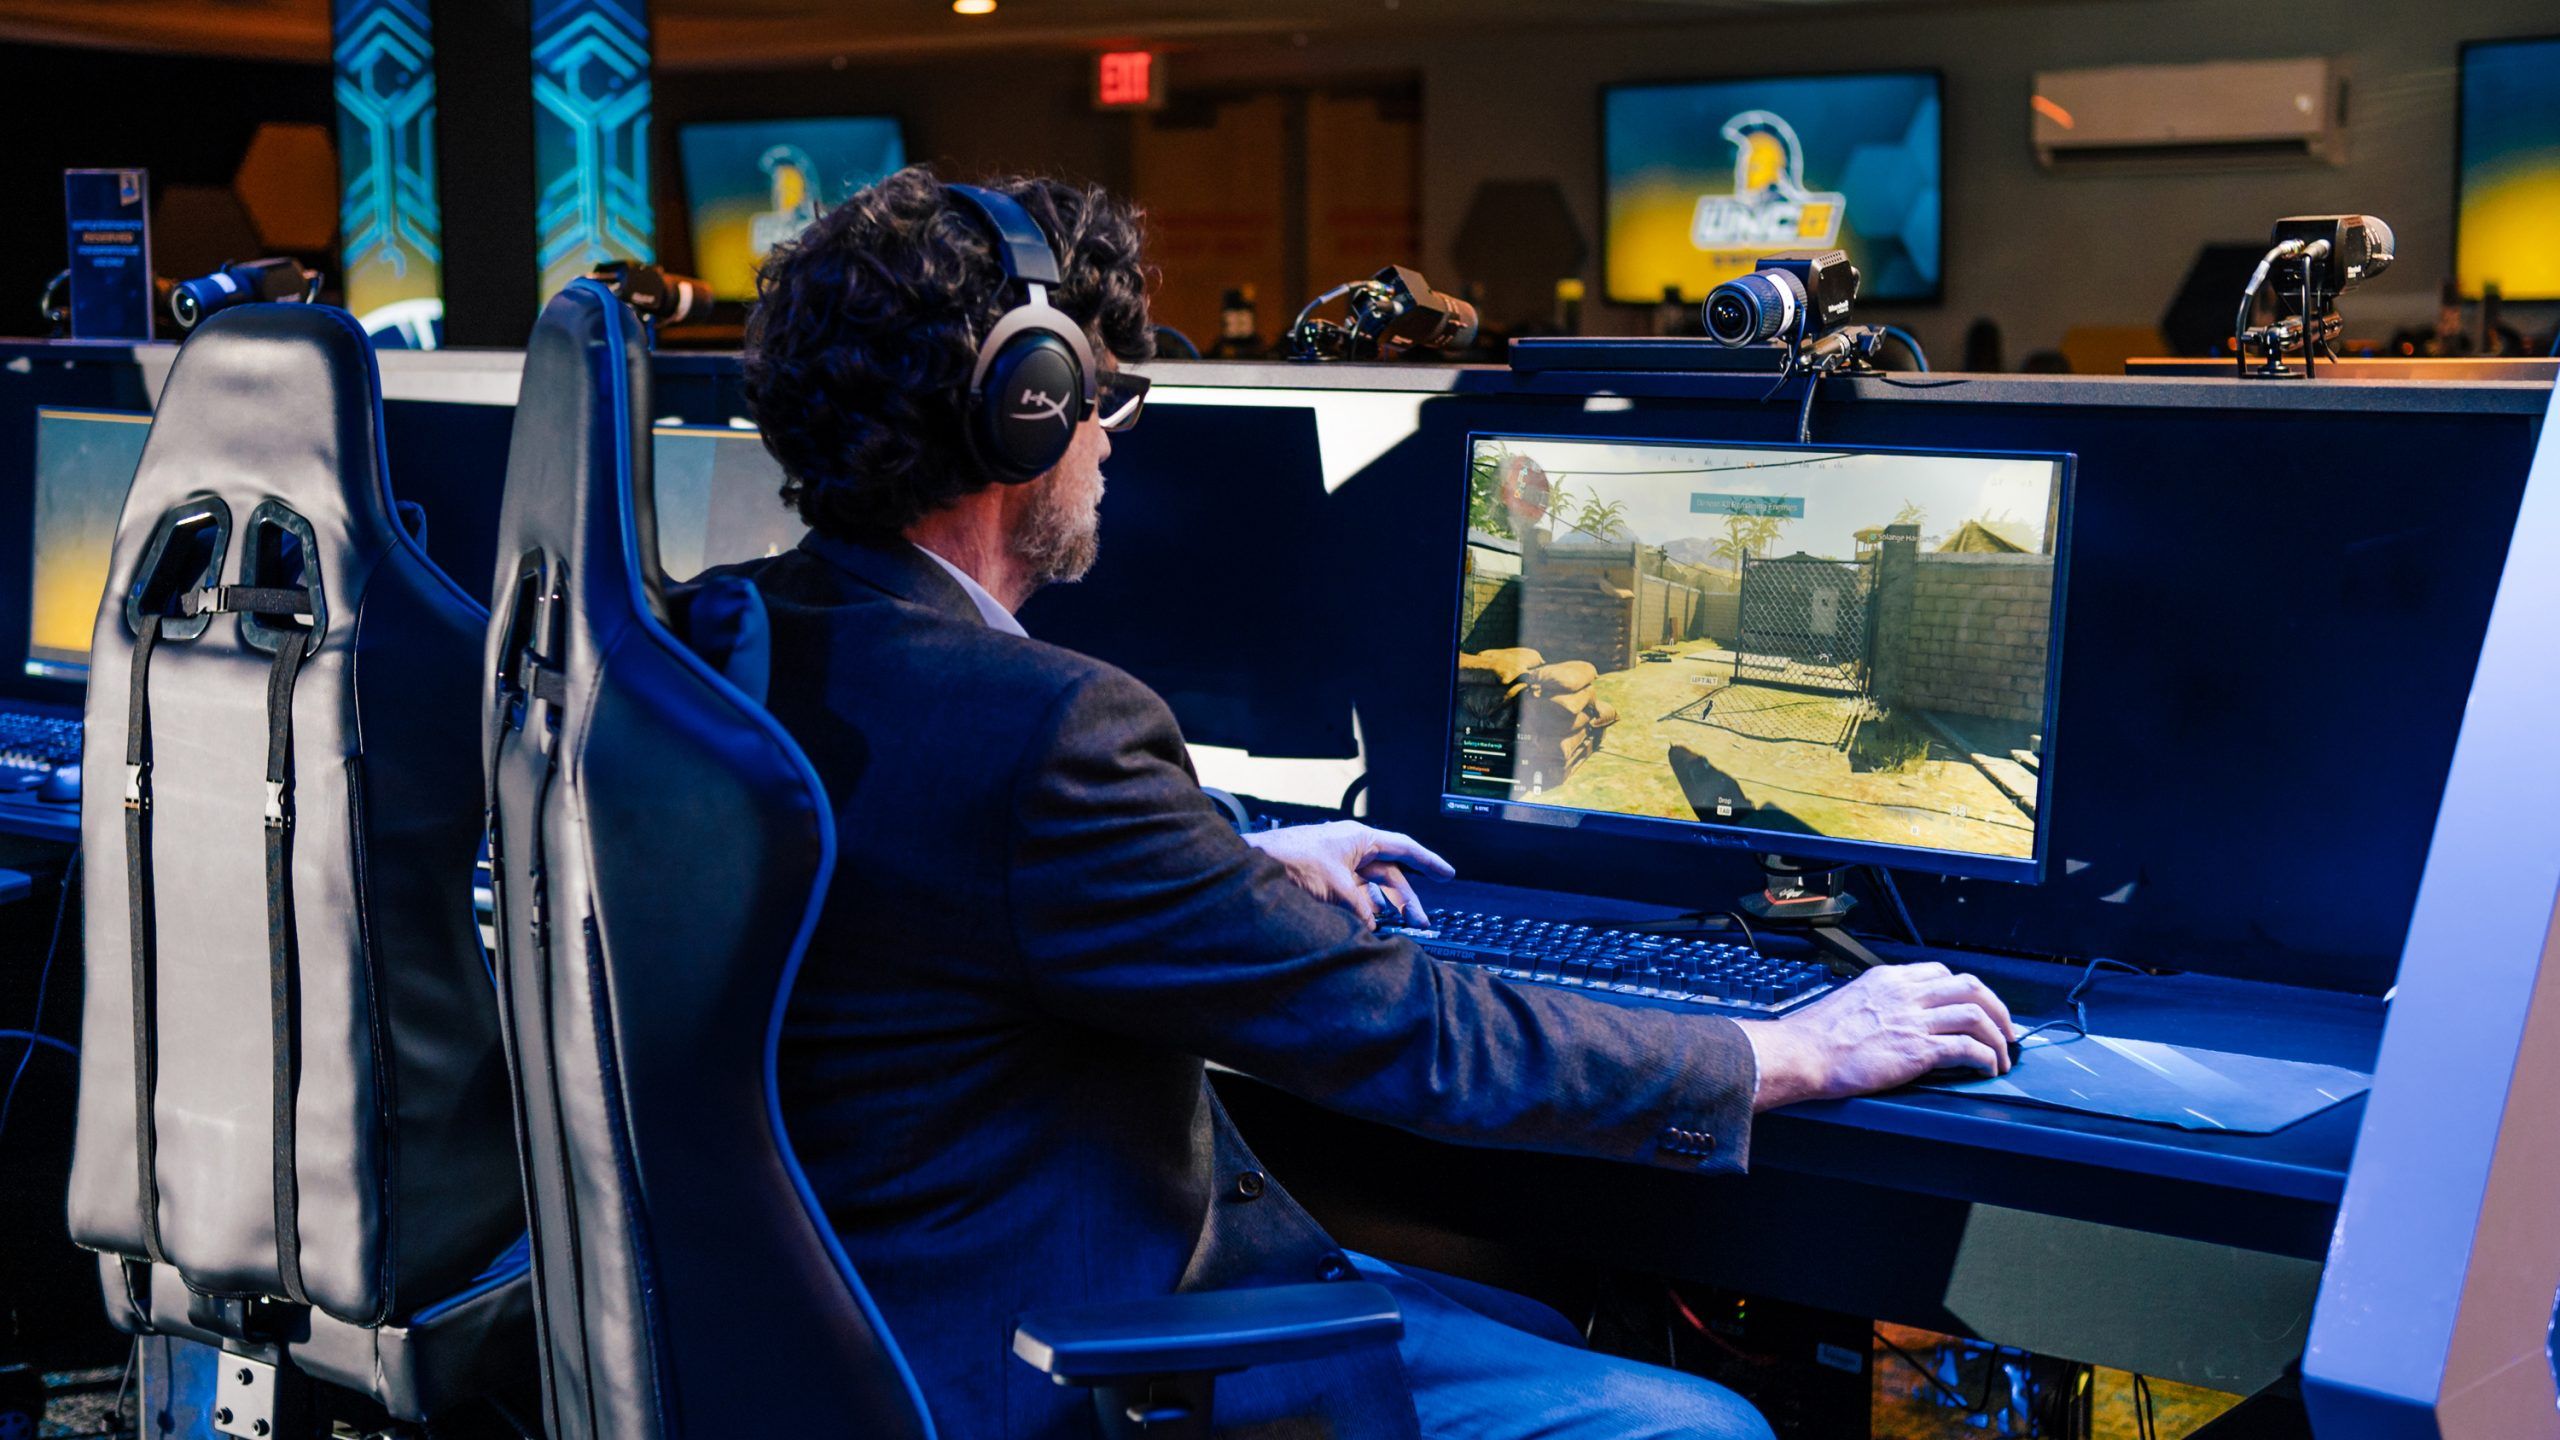 Dr. Grieve sits in UNCG's E-Sports arena playing a video game.